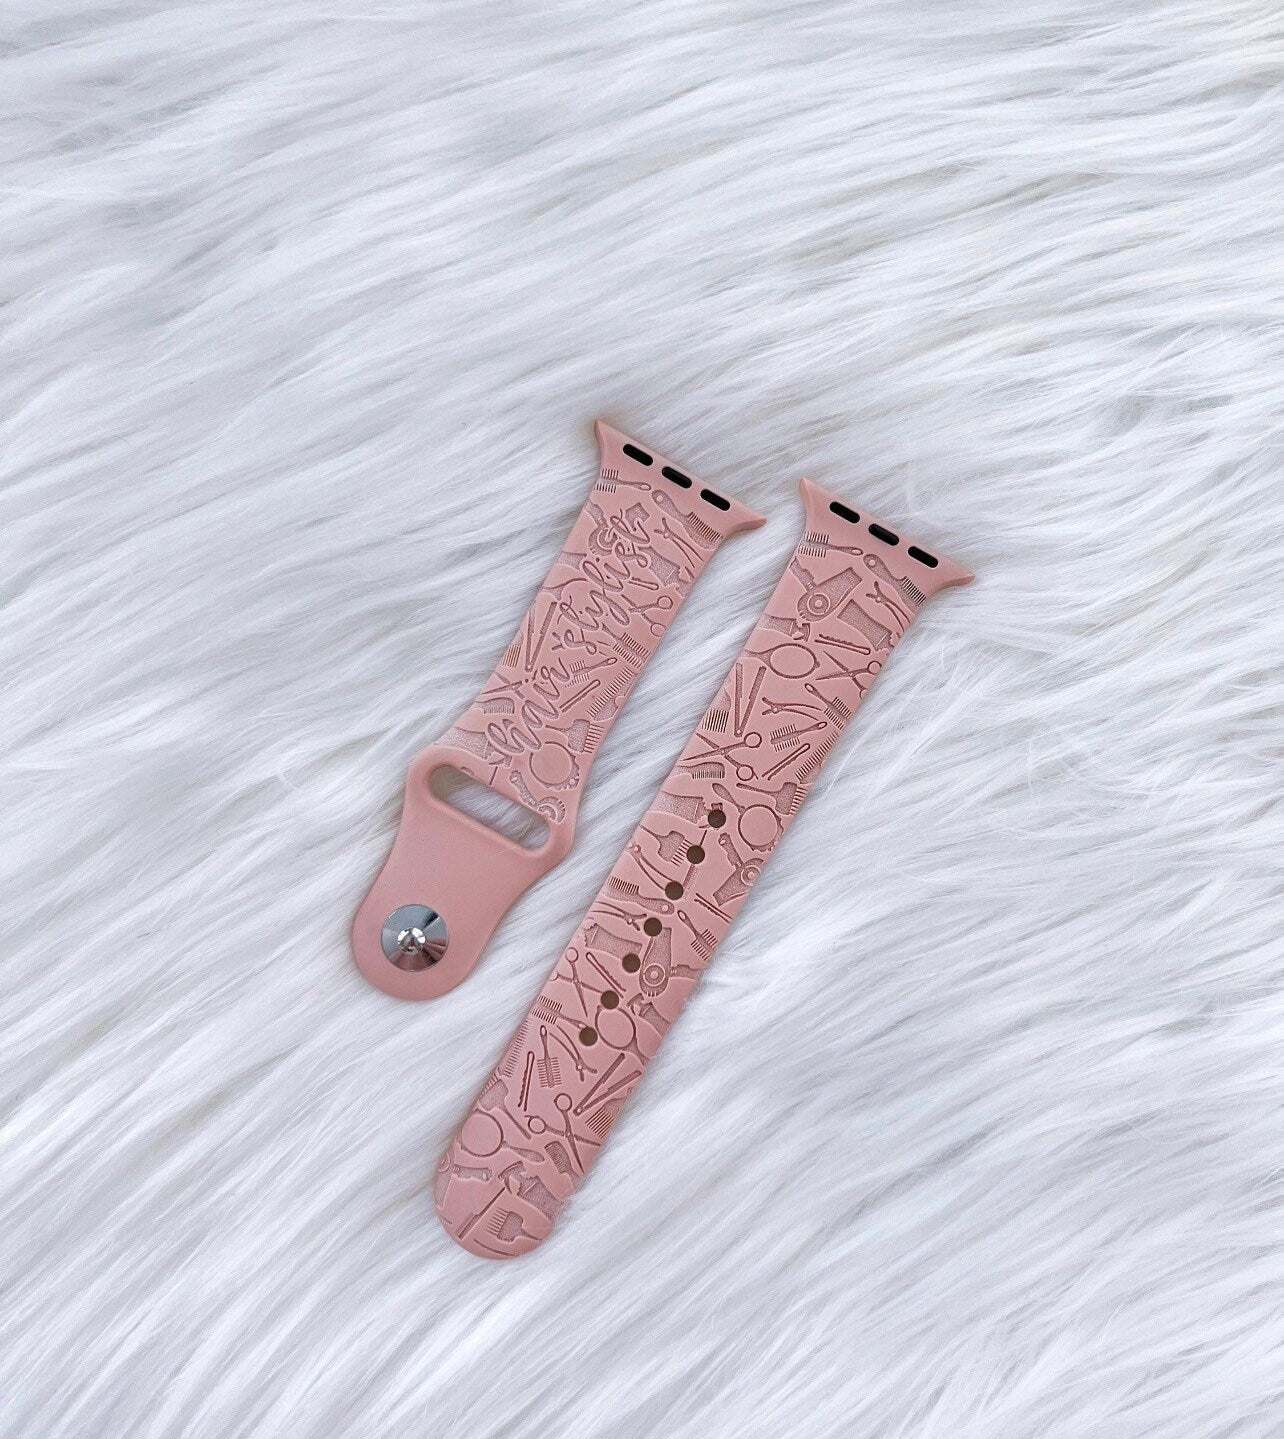 Hair stylist Print Engraved Watch Strap Compatible with Apple Watch Bands Series 1 2 3 4 5 6 7 SE Watch Band, 38mm 40mm 42mm 44mm